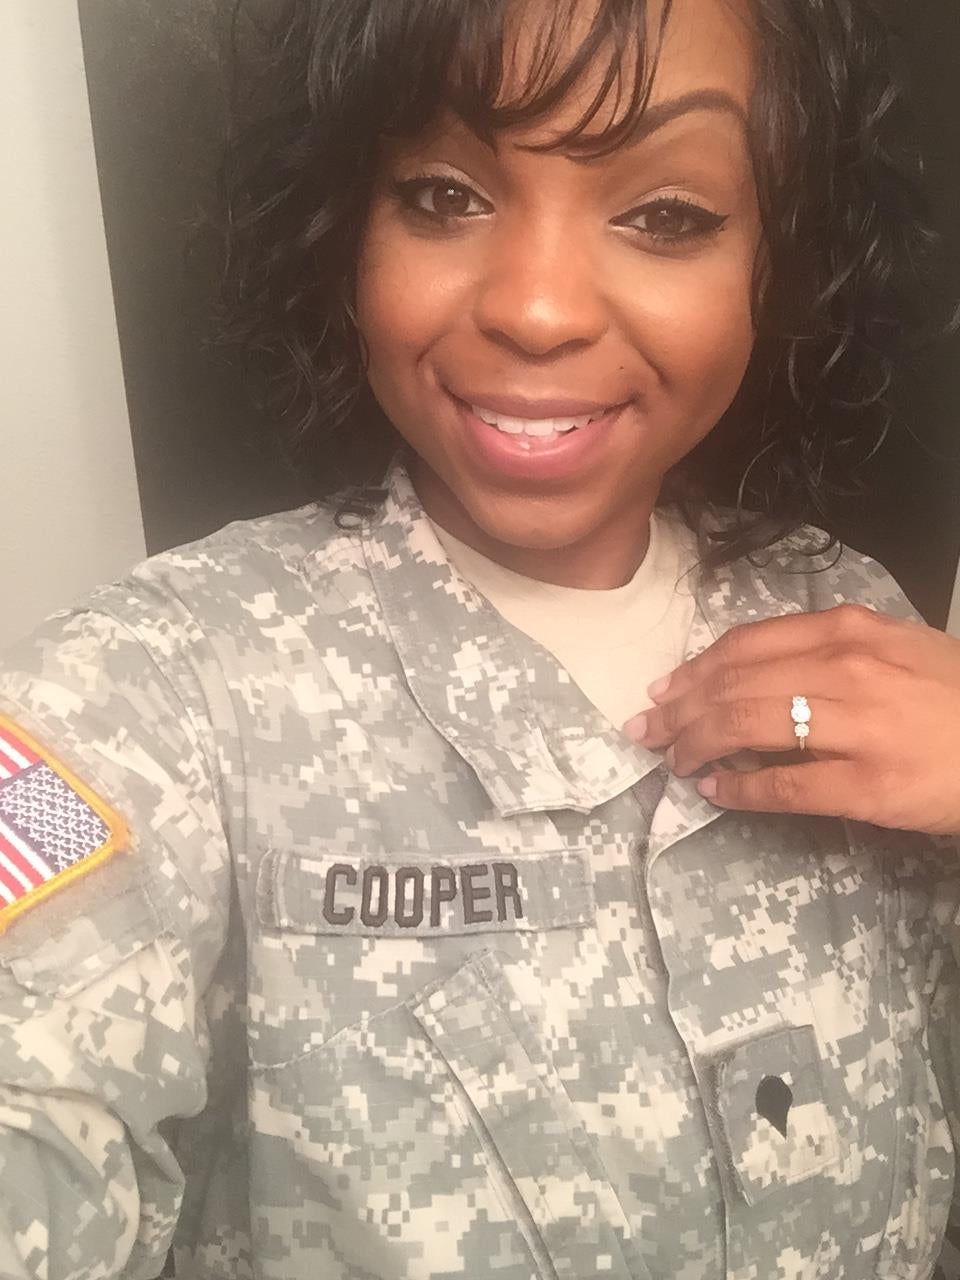 Soldier Meiziaha Cooper and her family were found dead on 15 November